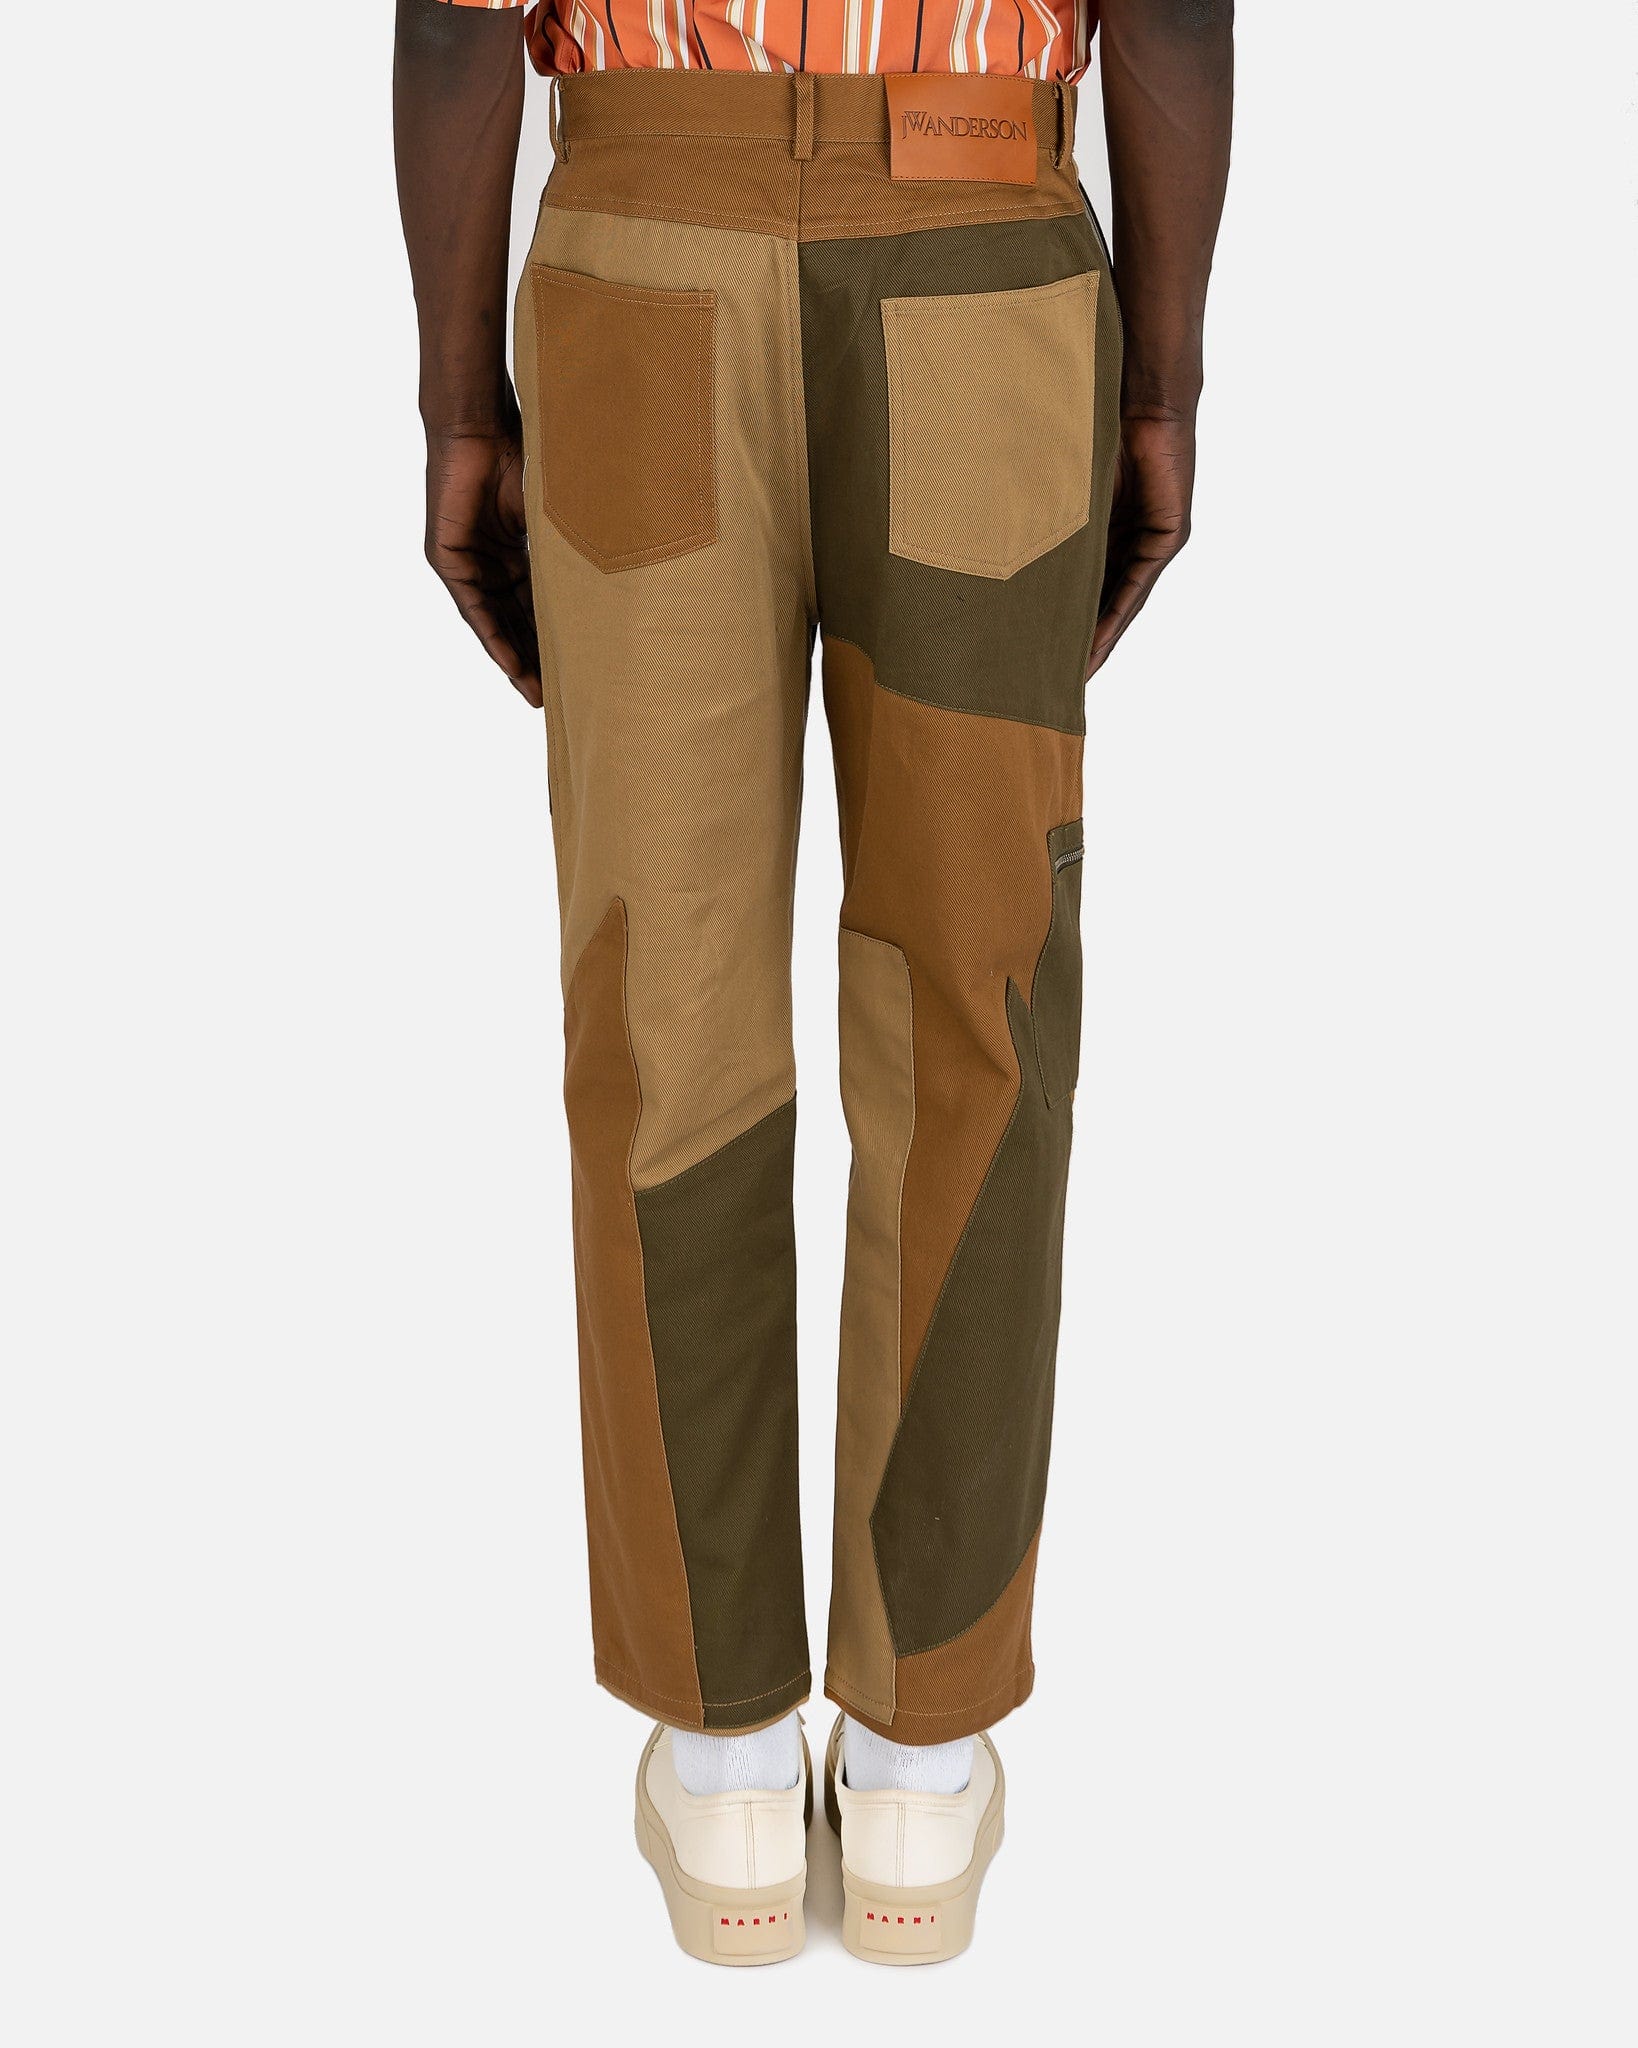 Patchwork Fatigue Trousers in Beige